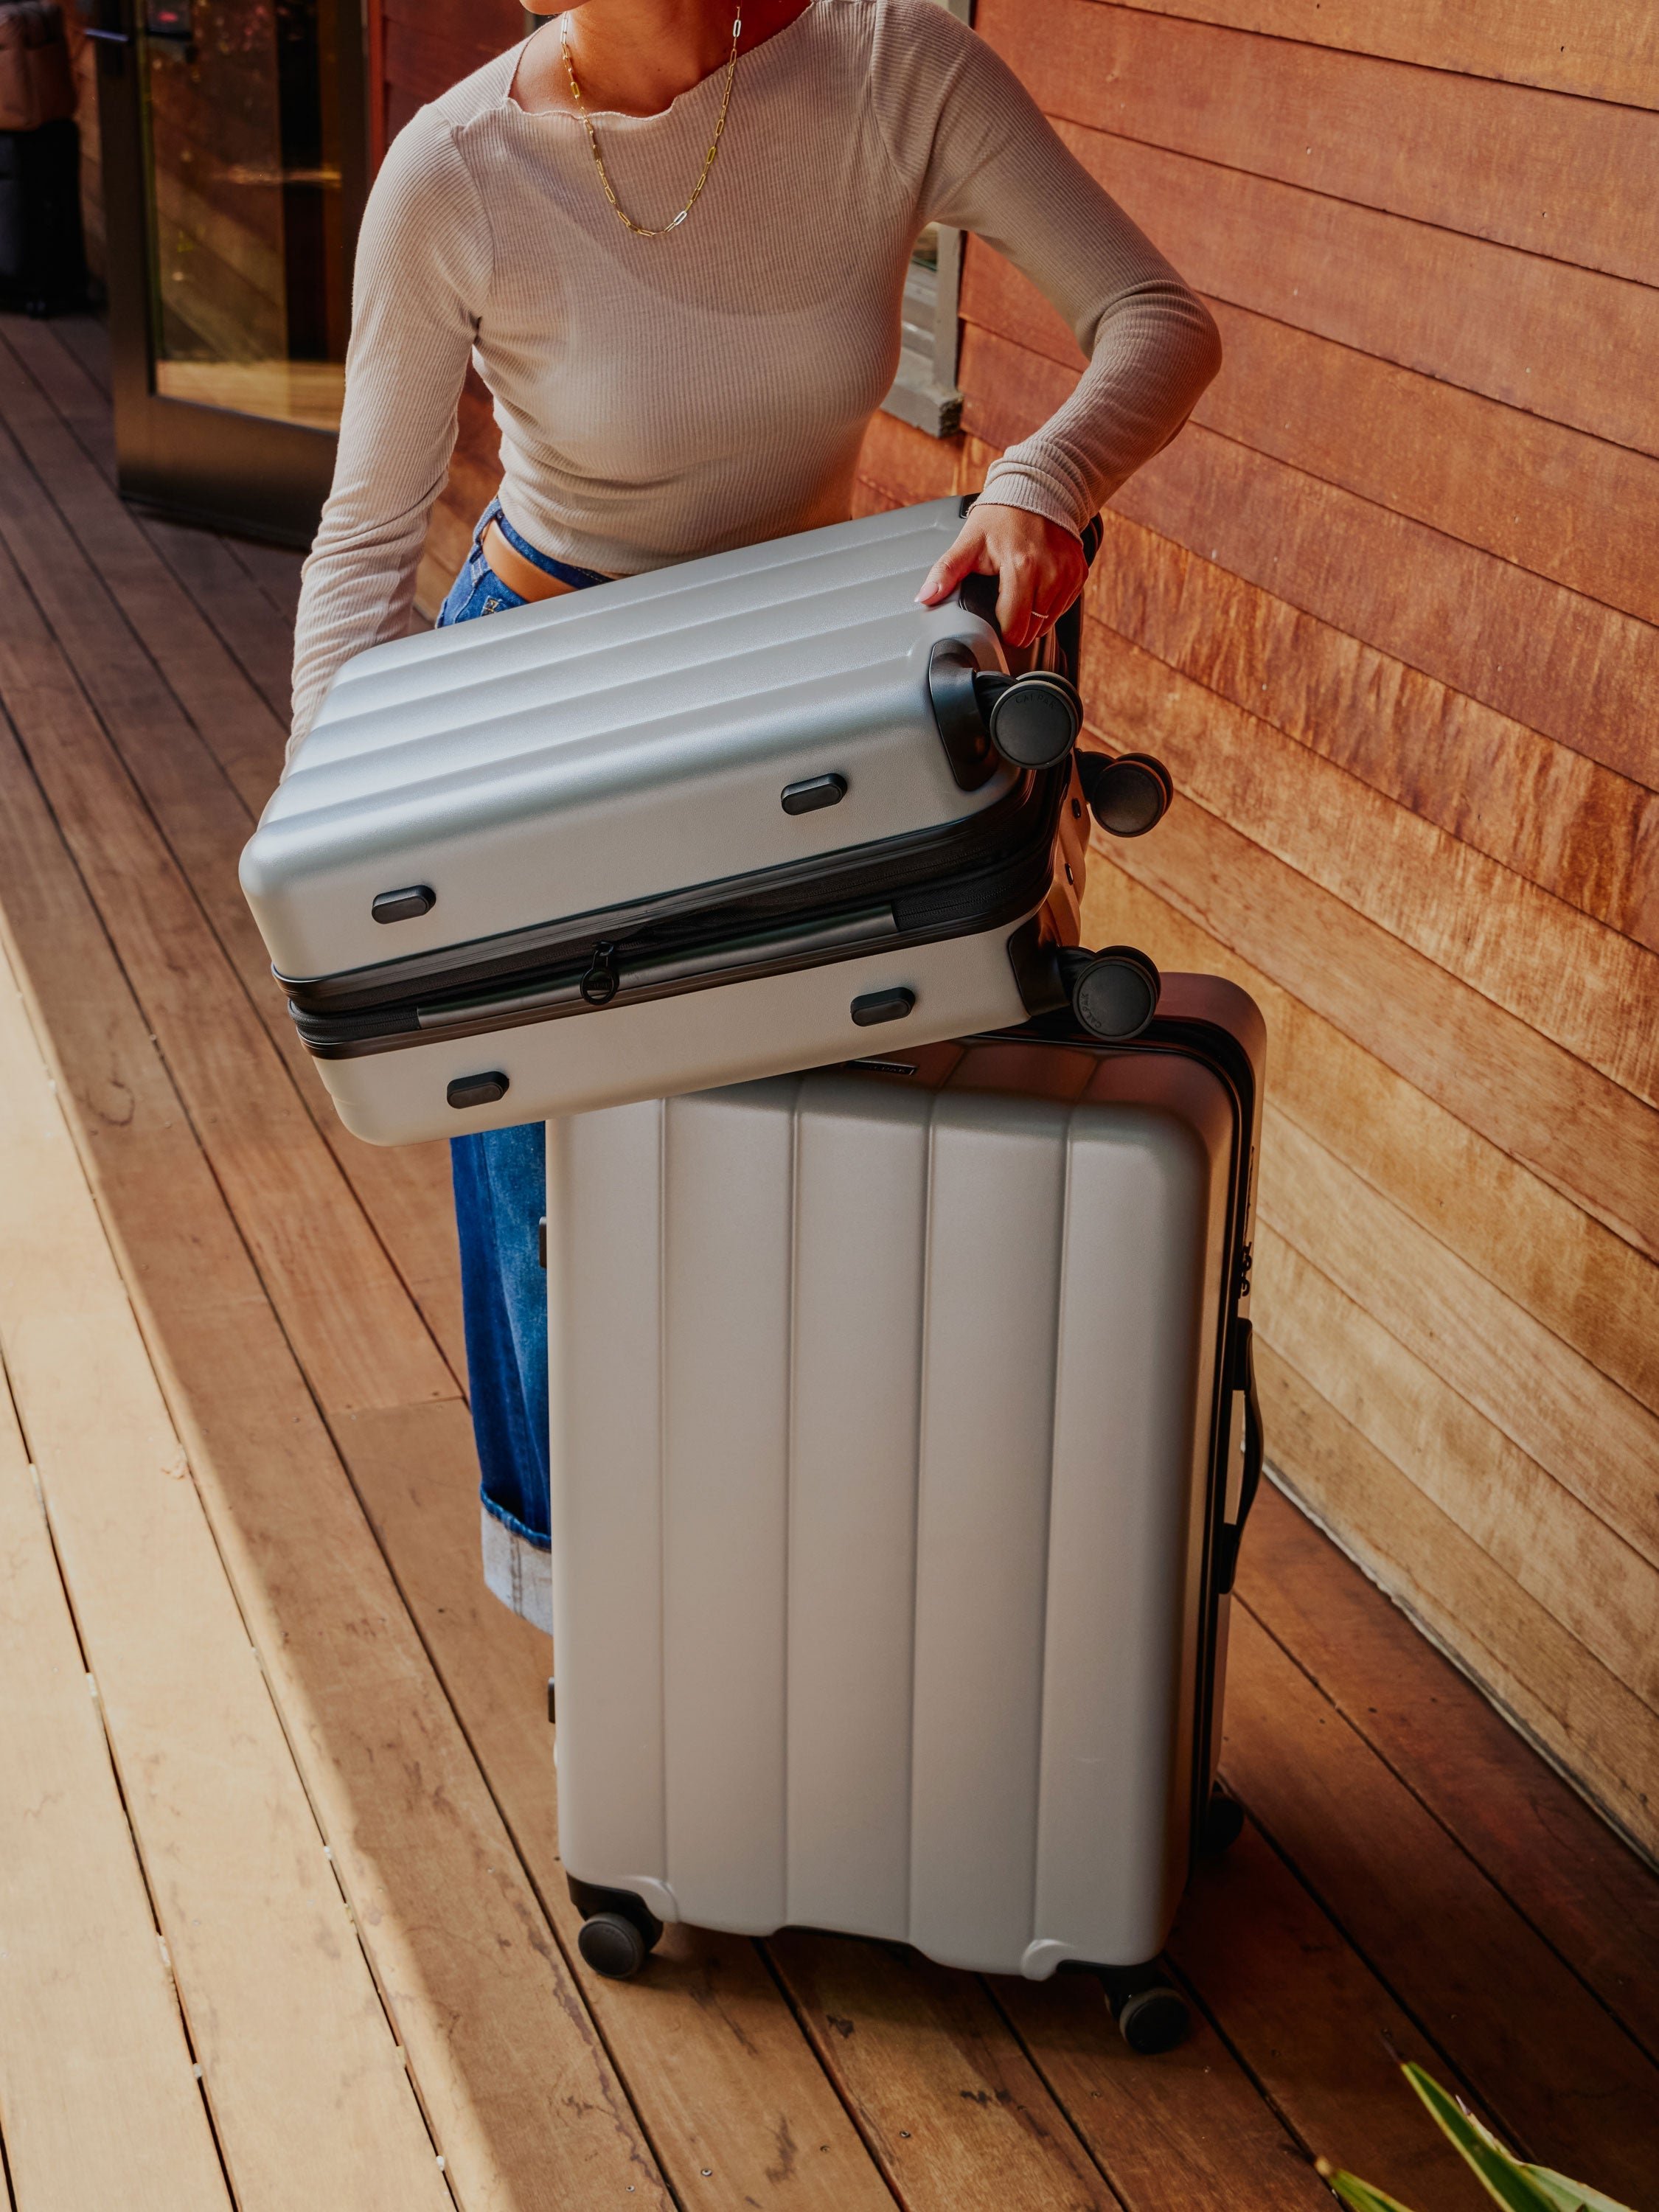 Model displaying the Evry carry-on luggage and large luggage in gray smoke